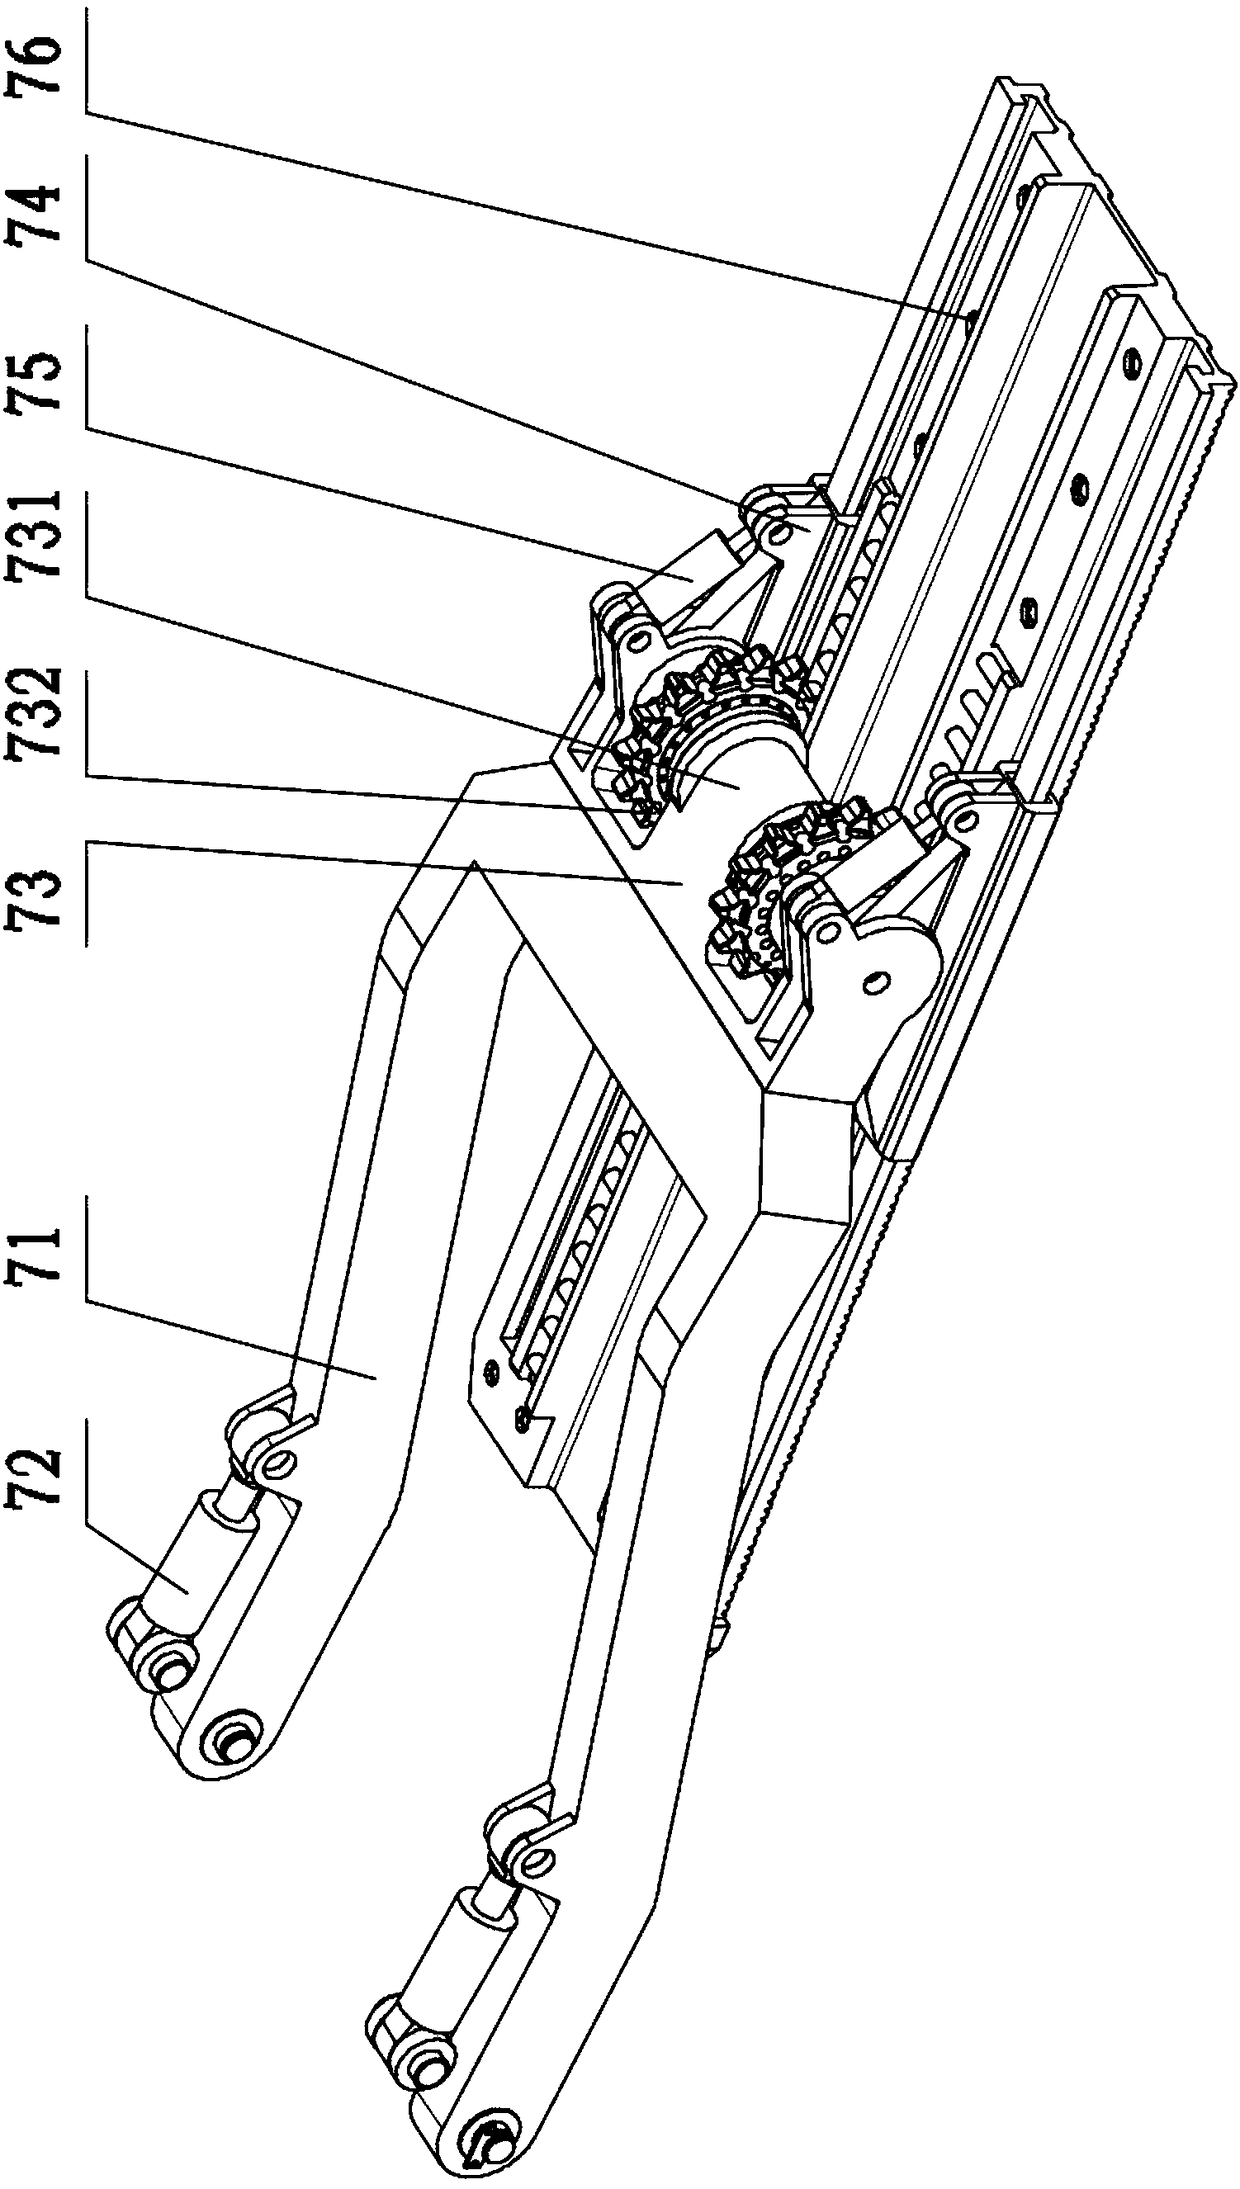 A climbing control method for a large-inclination roadheader with an auxiliary climbing device